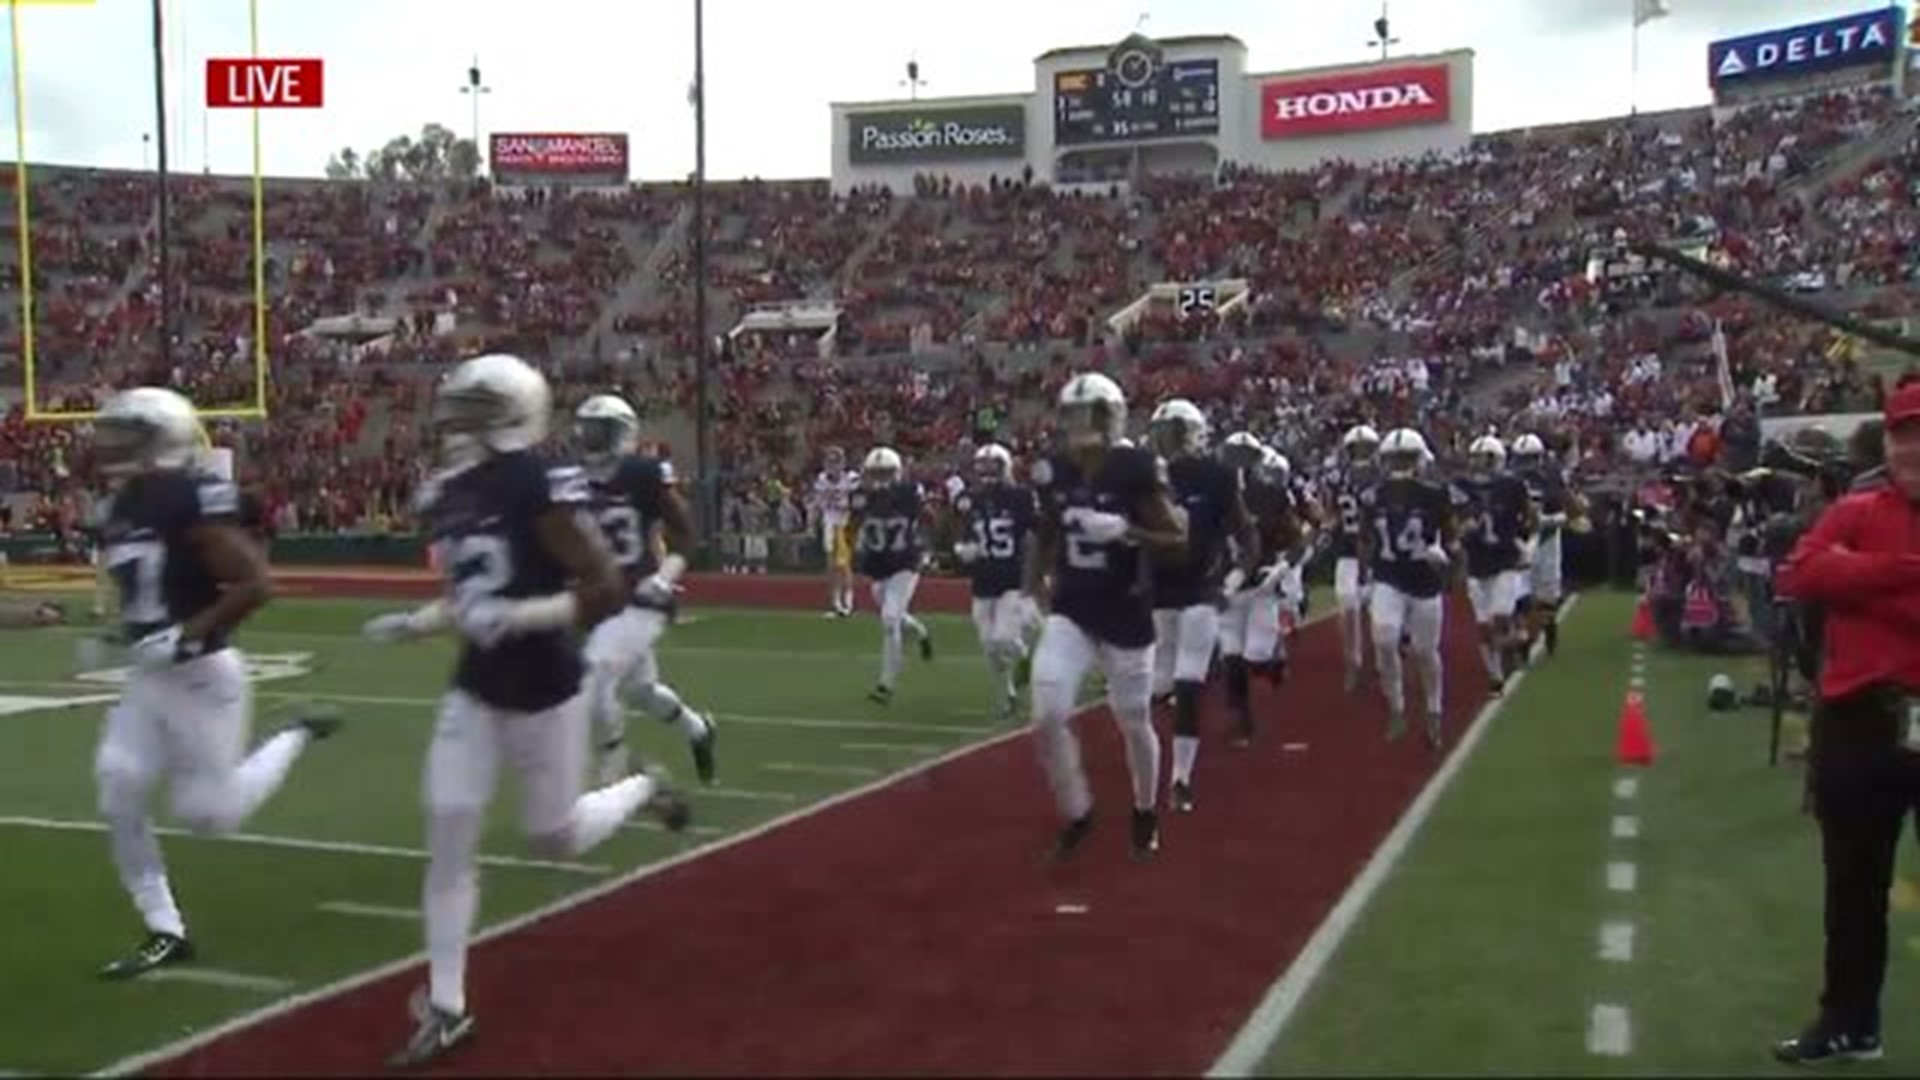 Penn State ready to take on USC in the Rose Bowl